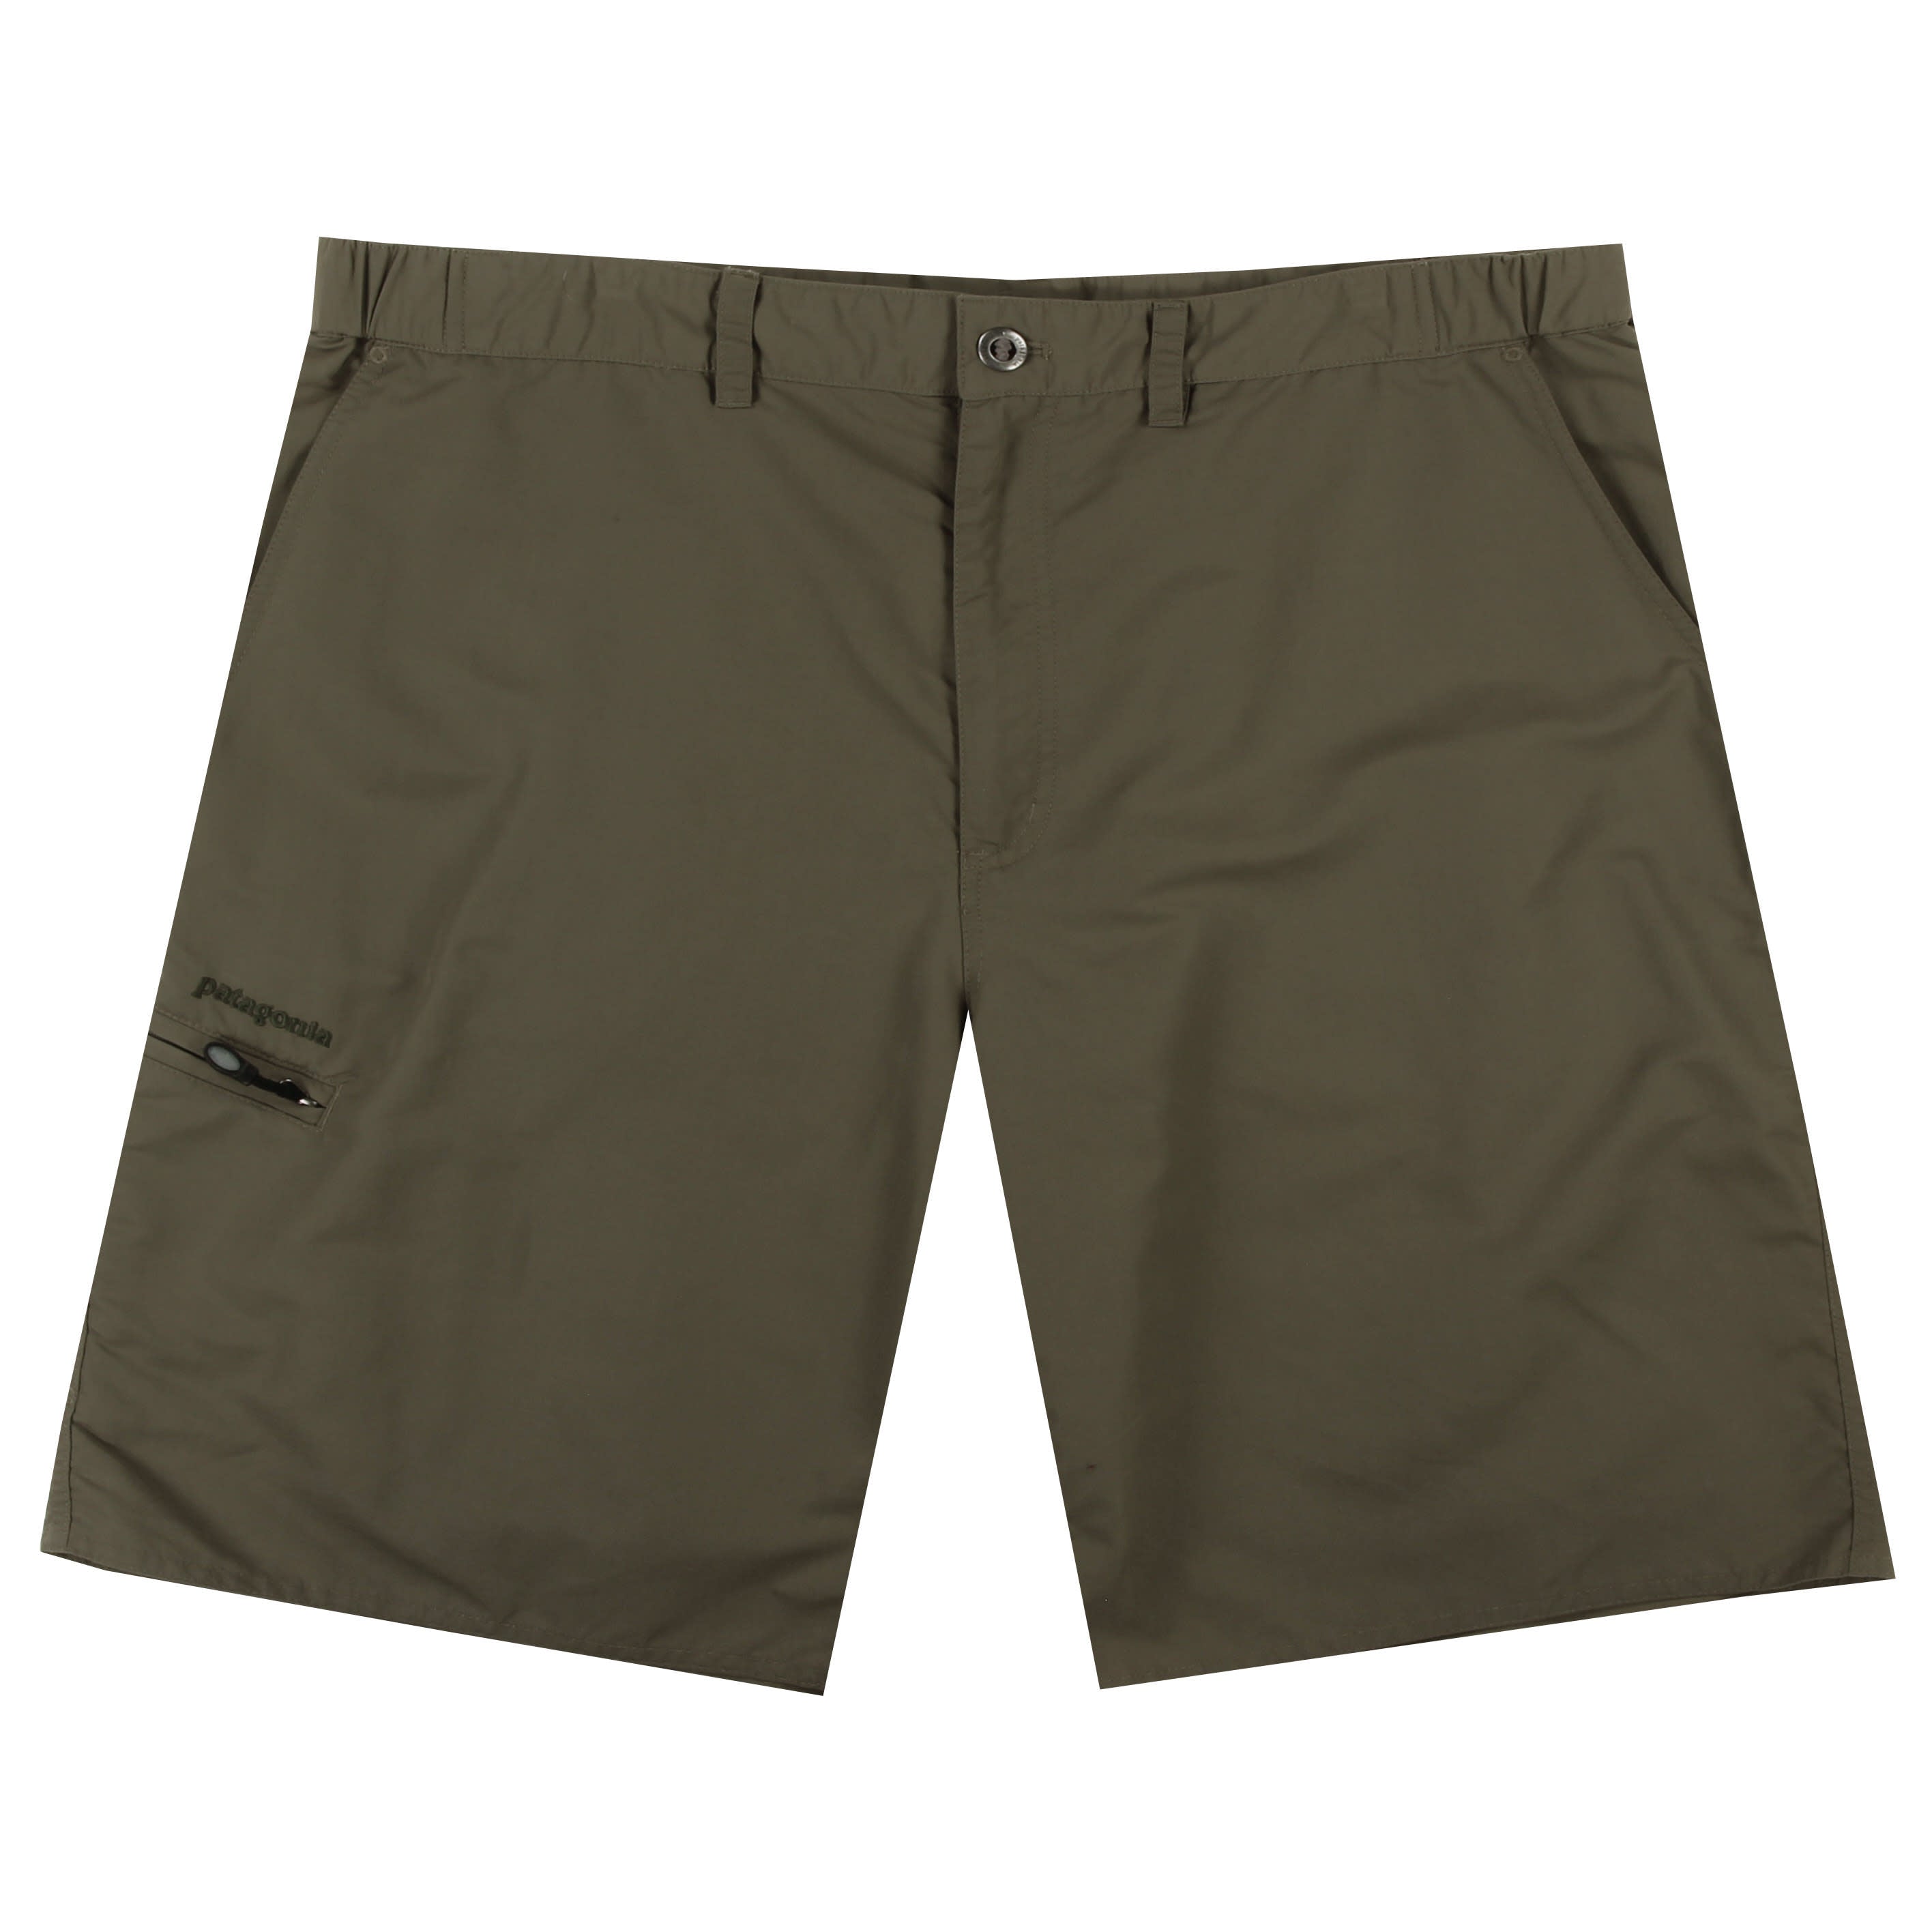 M's Guidewater Shorts